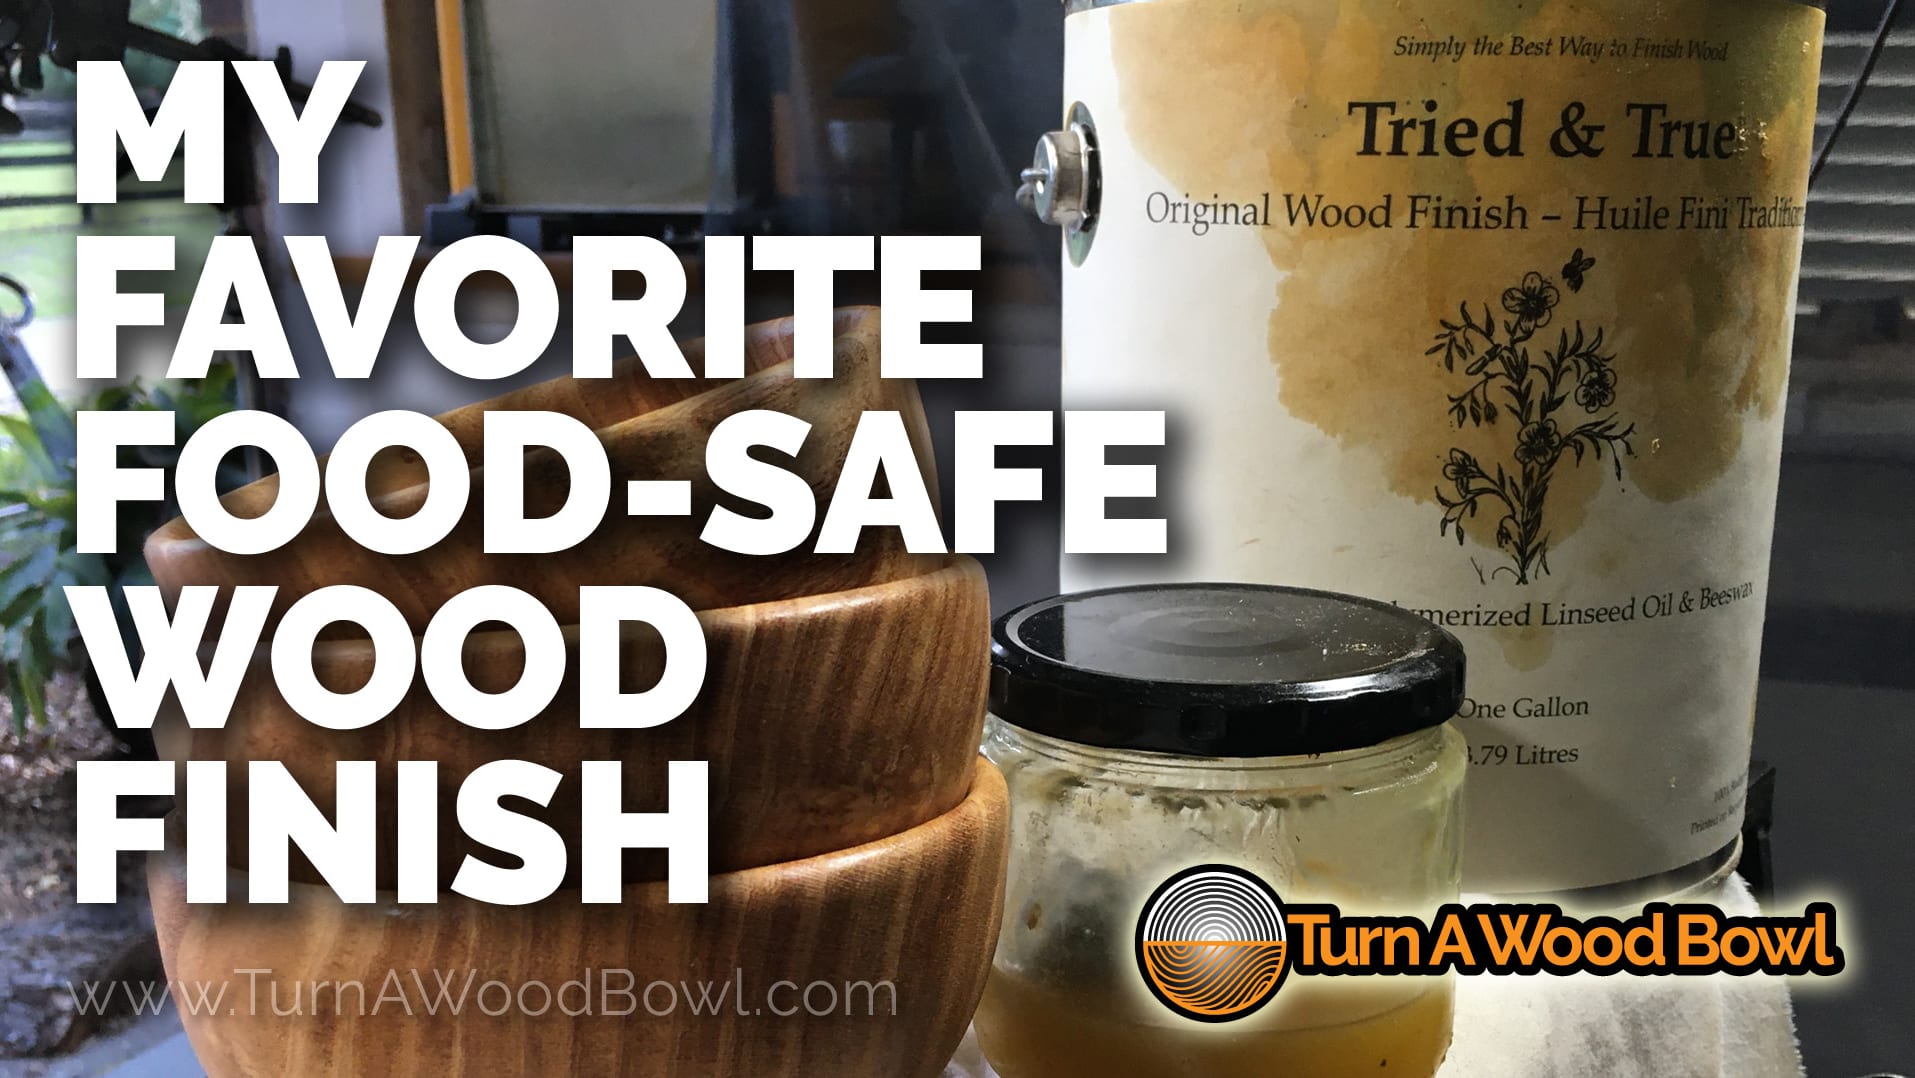 The Best Beeswax Wood Finish?